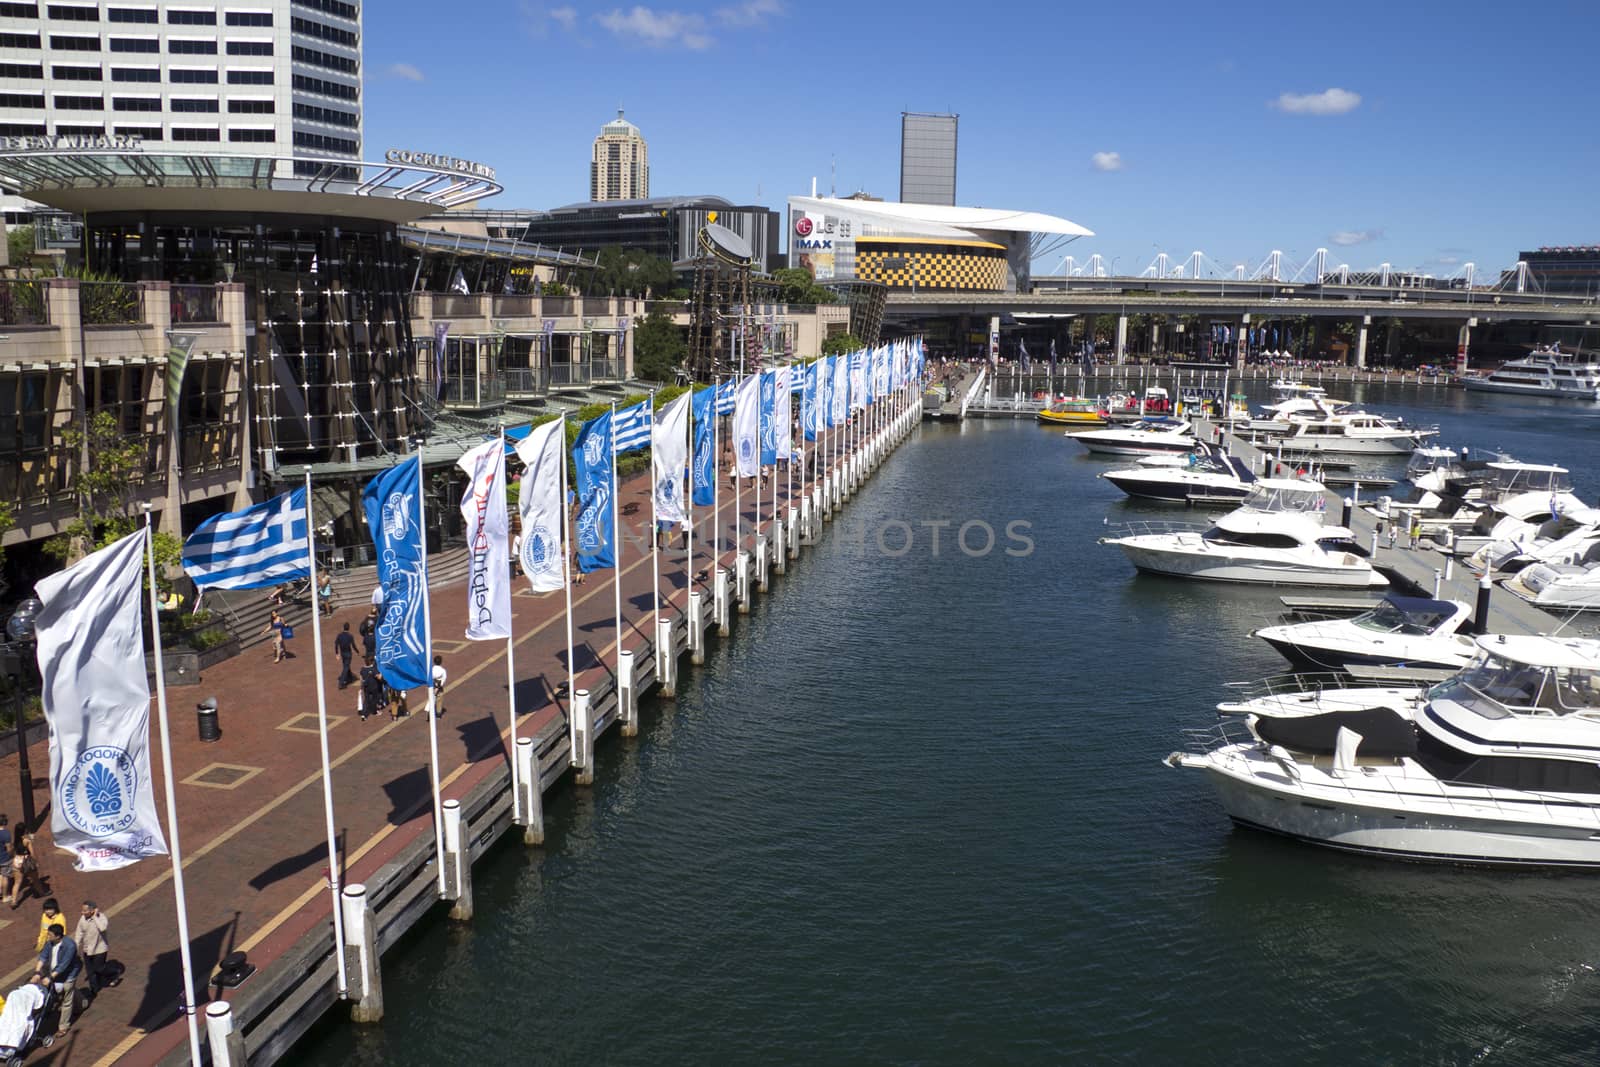 Boats moored in the marina at Darling Harbour. by khellon